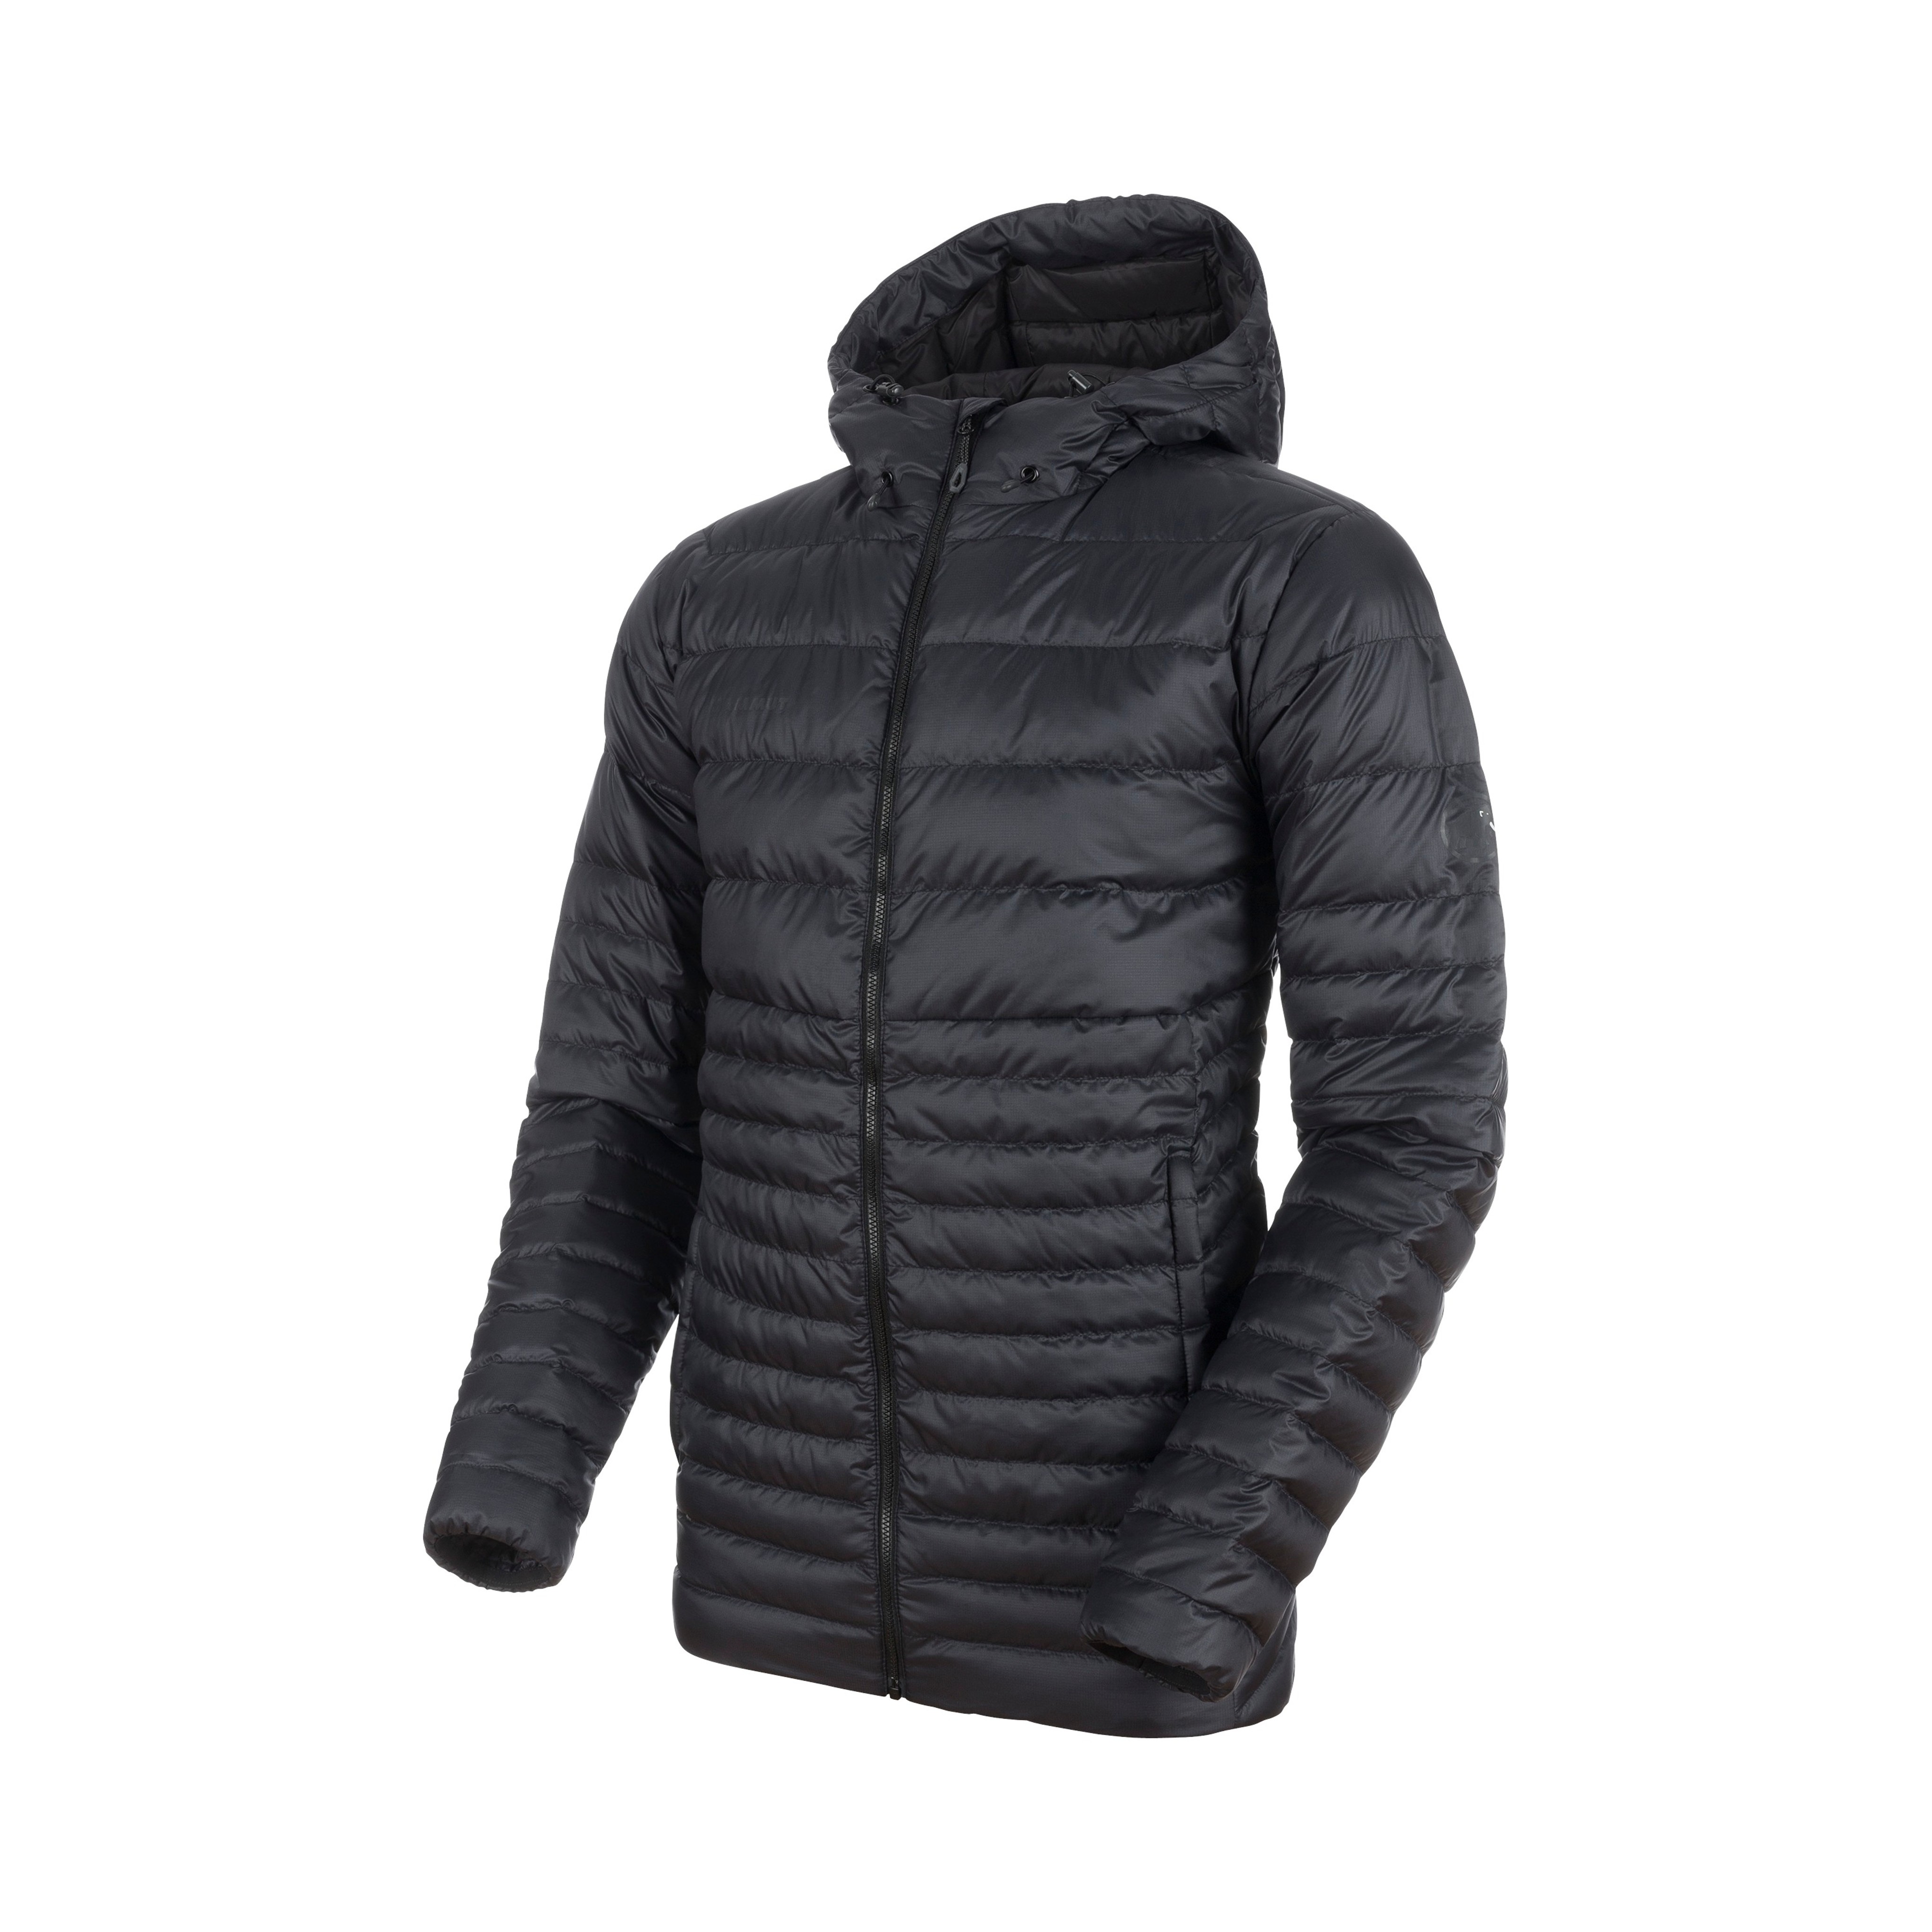 Convey IN Hooded Jacket Men product image